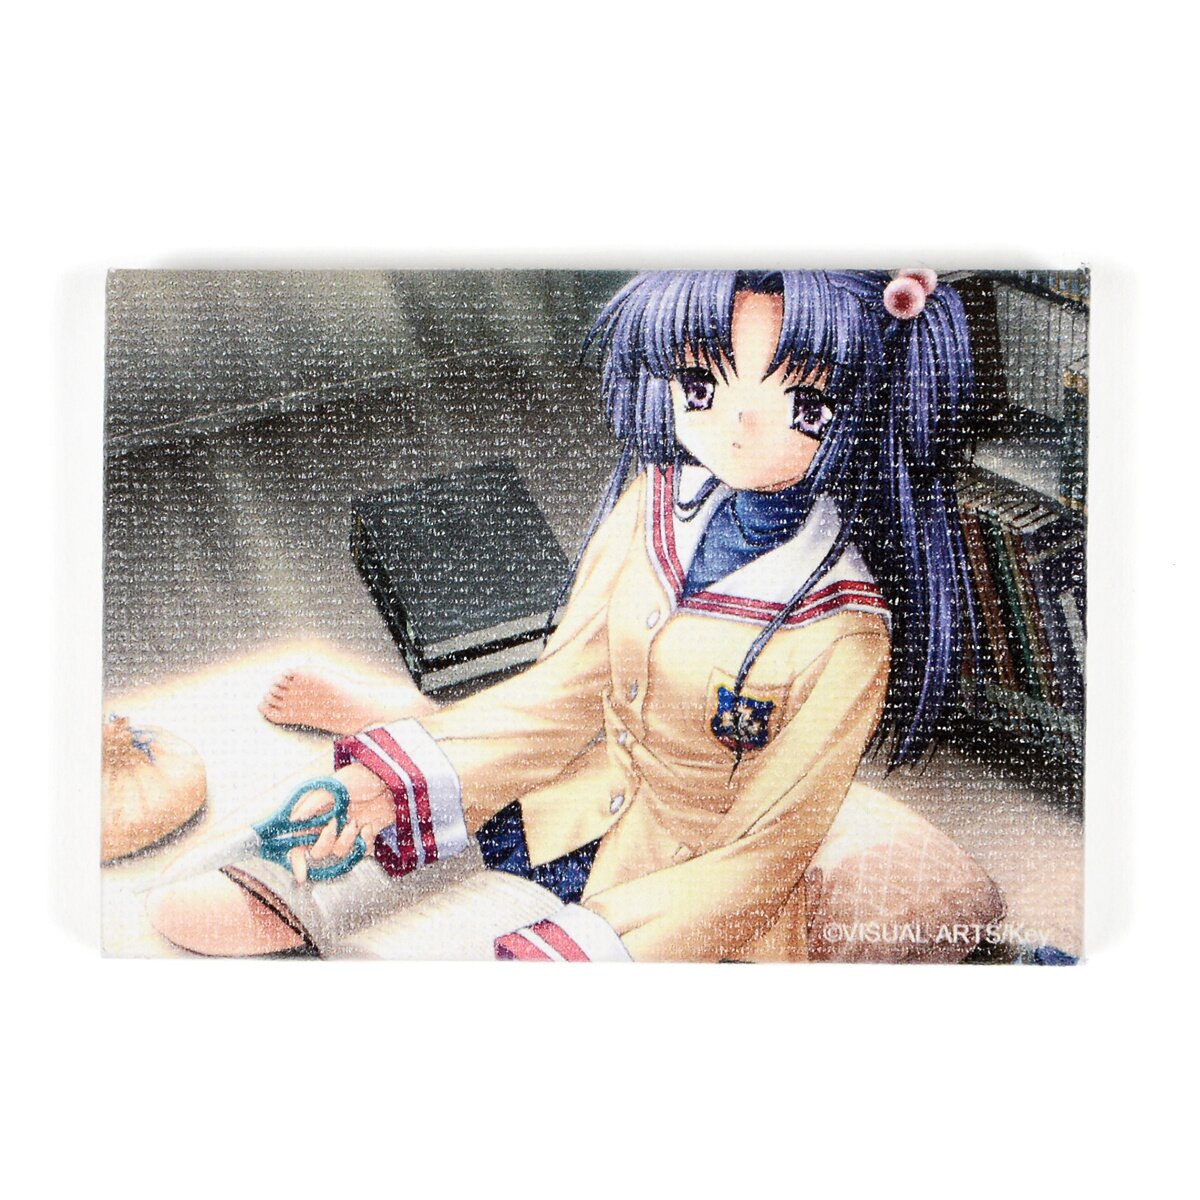 100+] Clannad Wallpapers